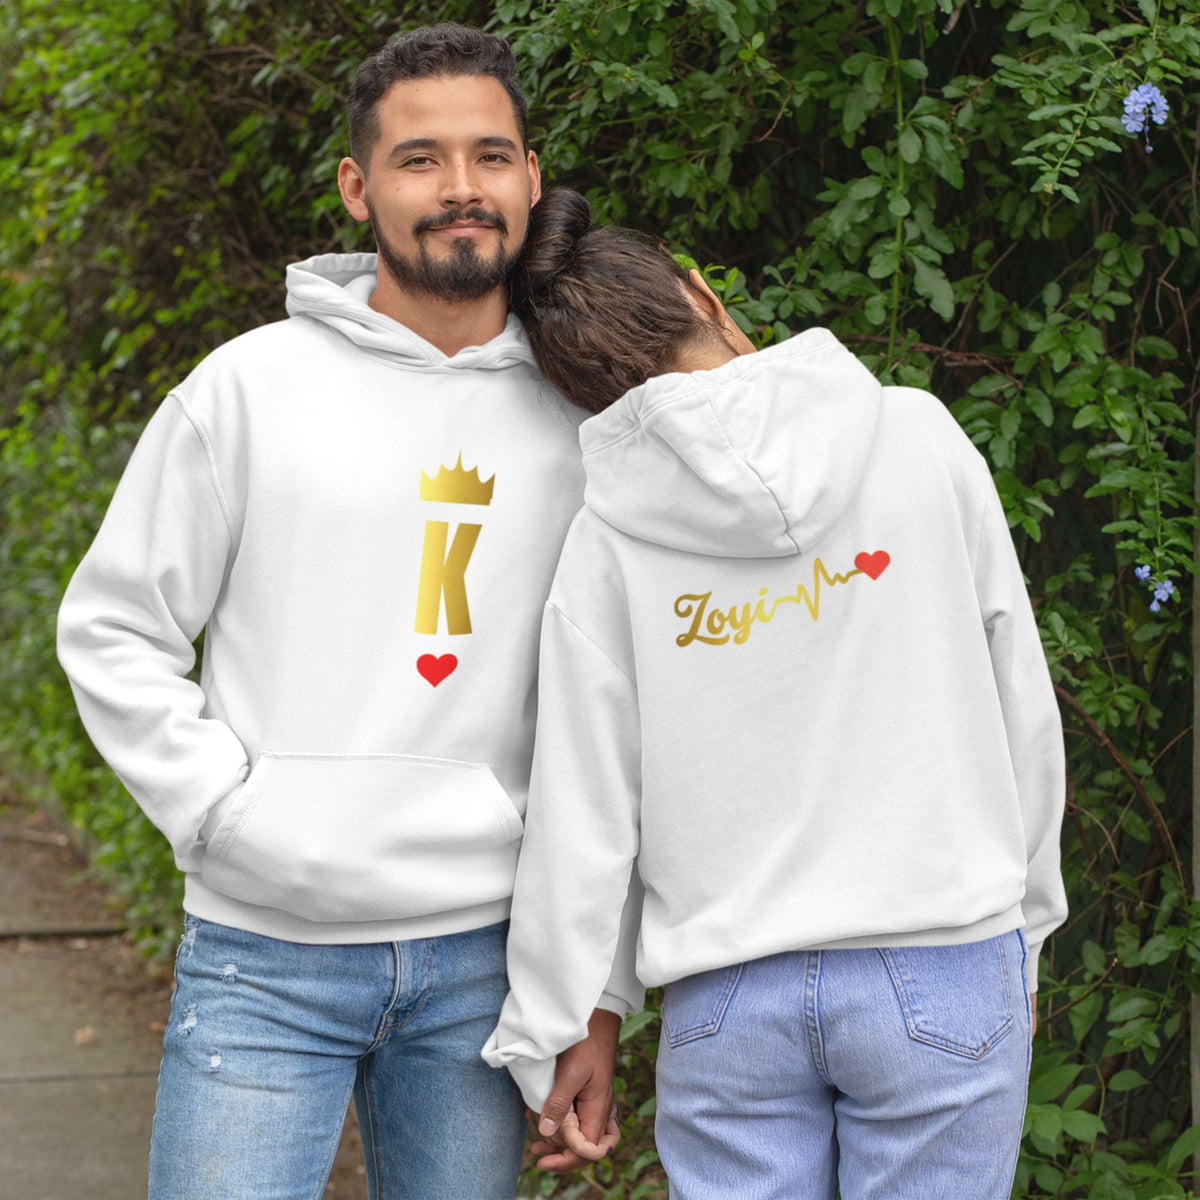 king-and-queen-personalised-hoodies-with-gold-metallic-print-on-front-back-sleeve-_-wrists-white-back-gogirgit-com